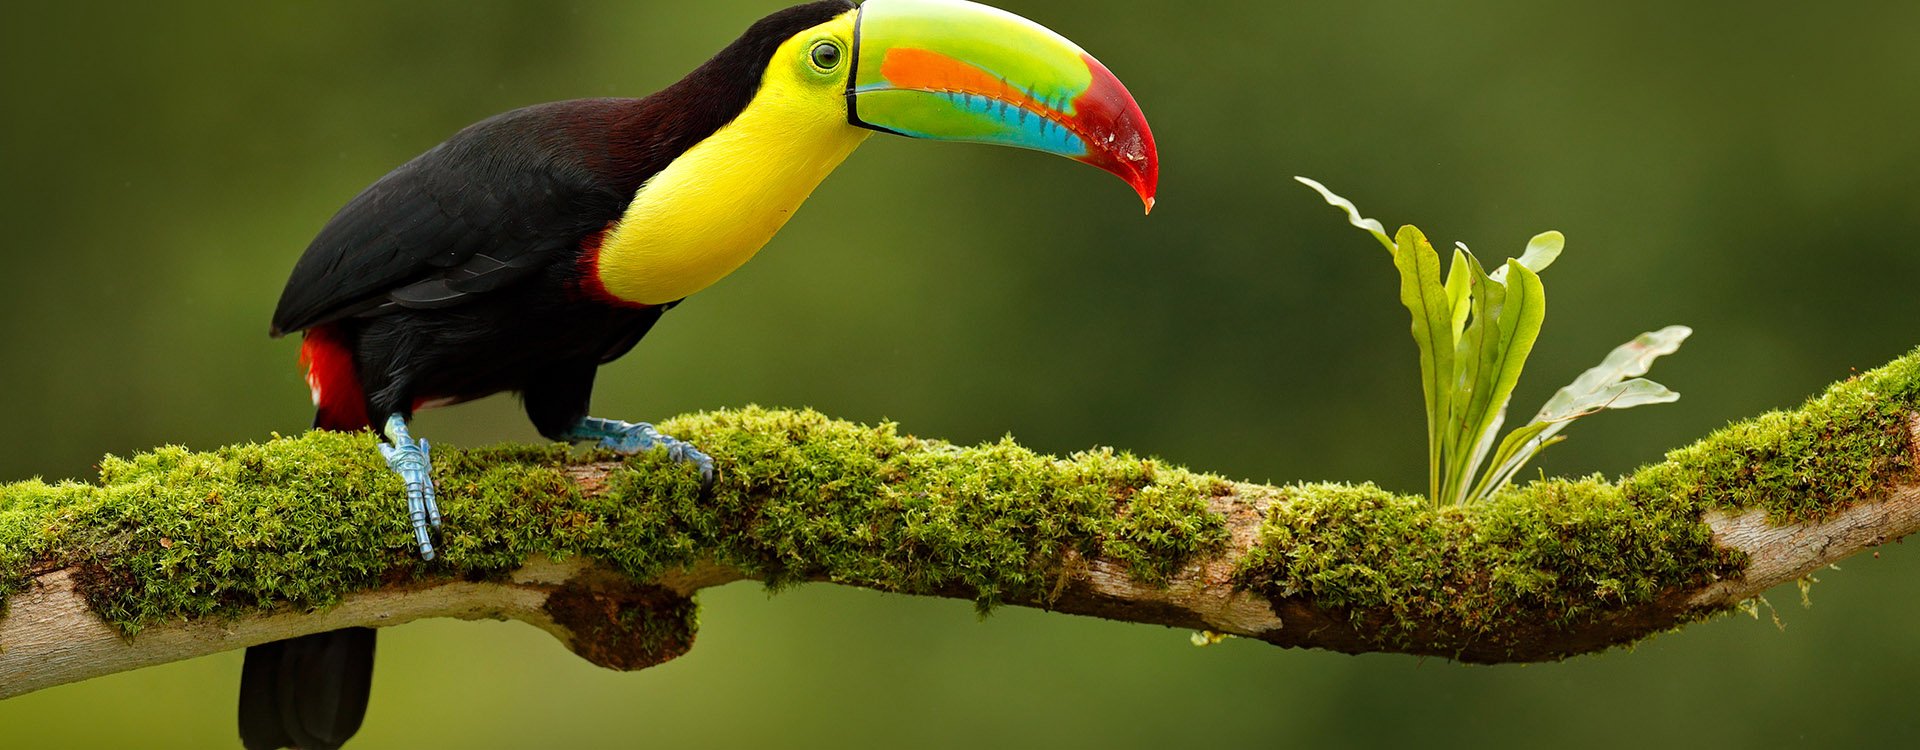 Keel-billed Toucan, sitting on the branch in the forest, Boca Tapada, Costa Rica. Nature travel in central America